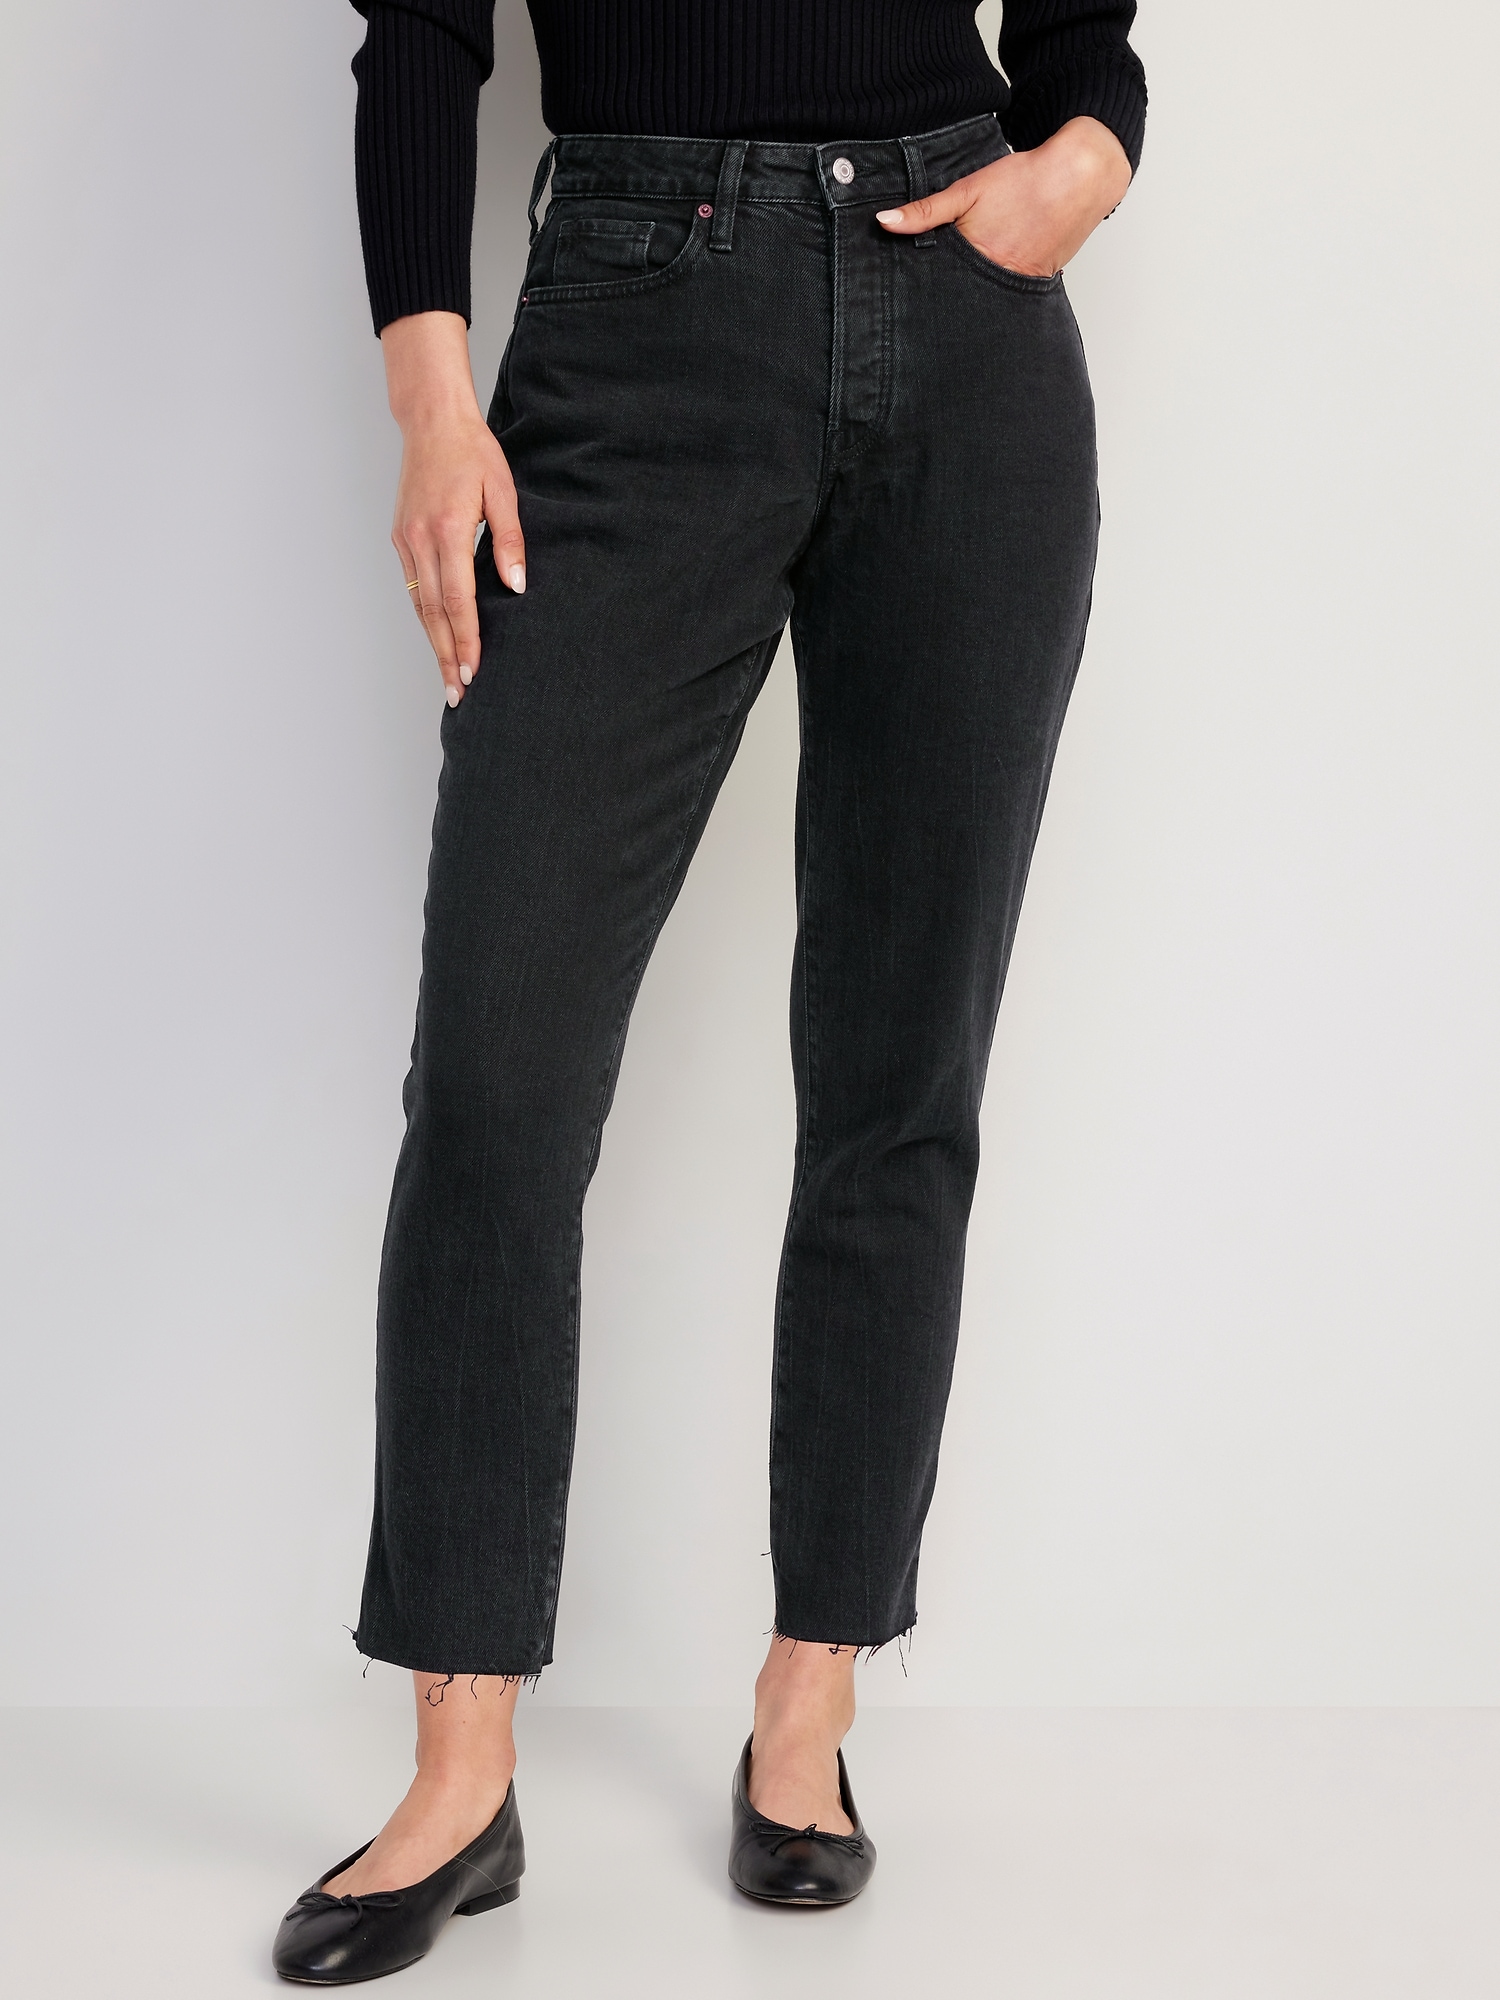 Old Navy Curvy High-Waisted Button-Fly OG Straight Cut-Off Jeans for Women black. 1